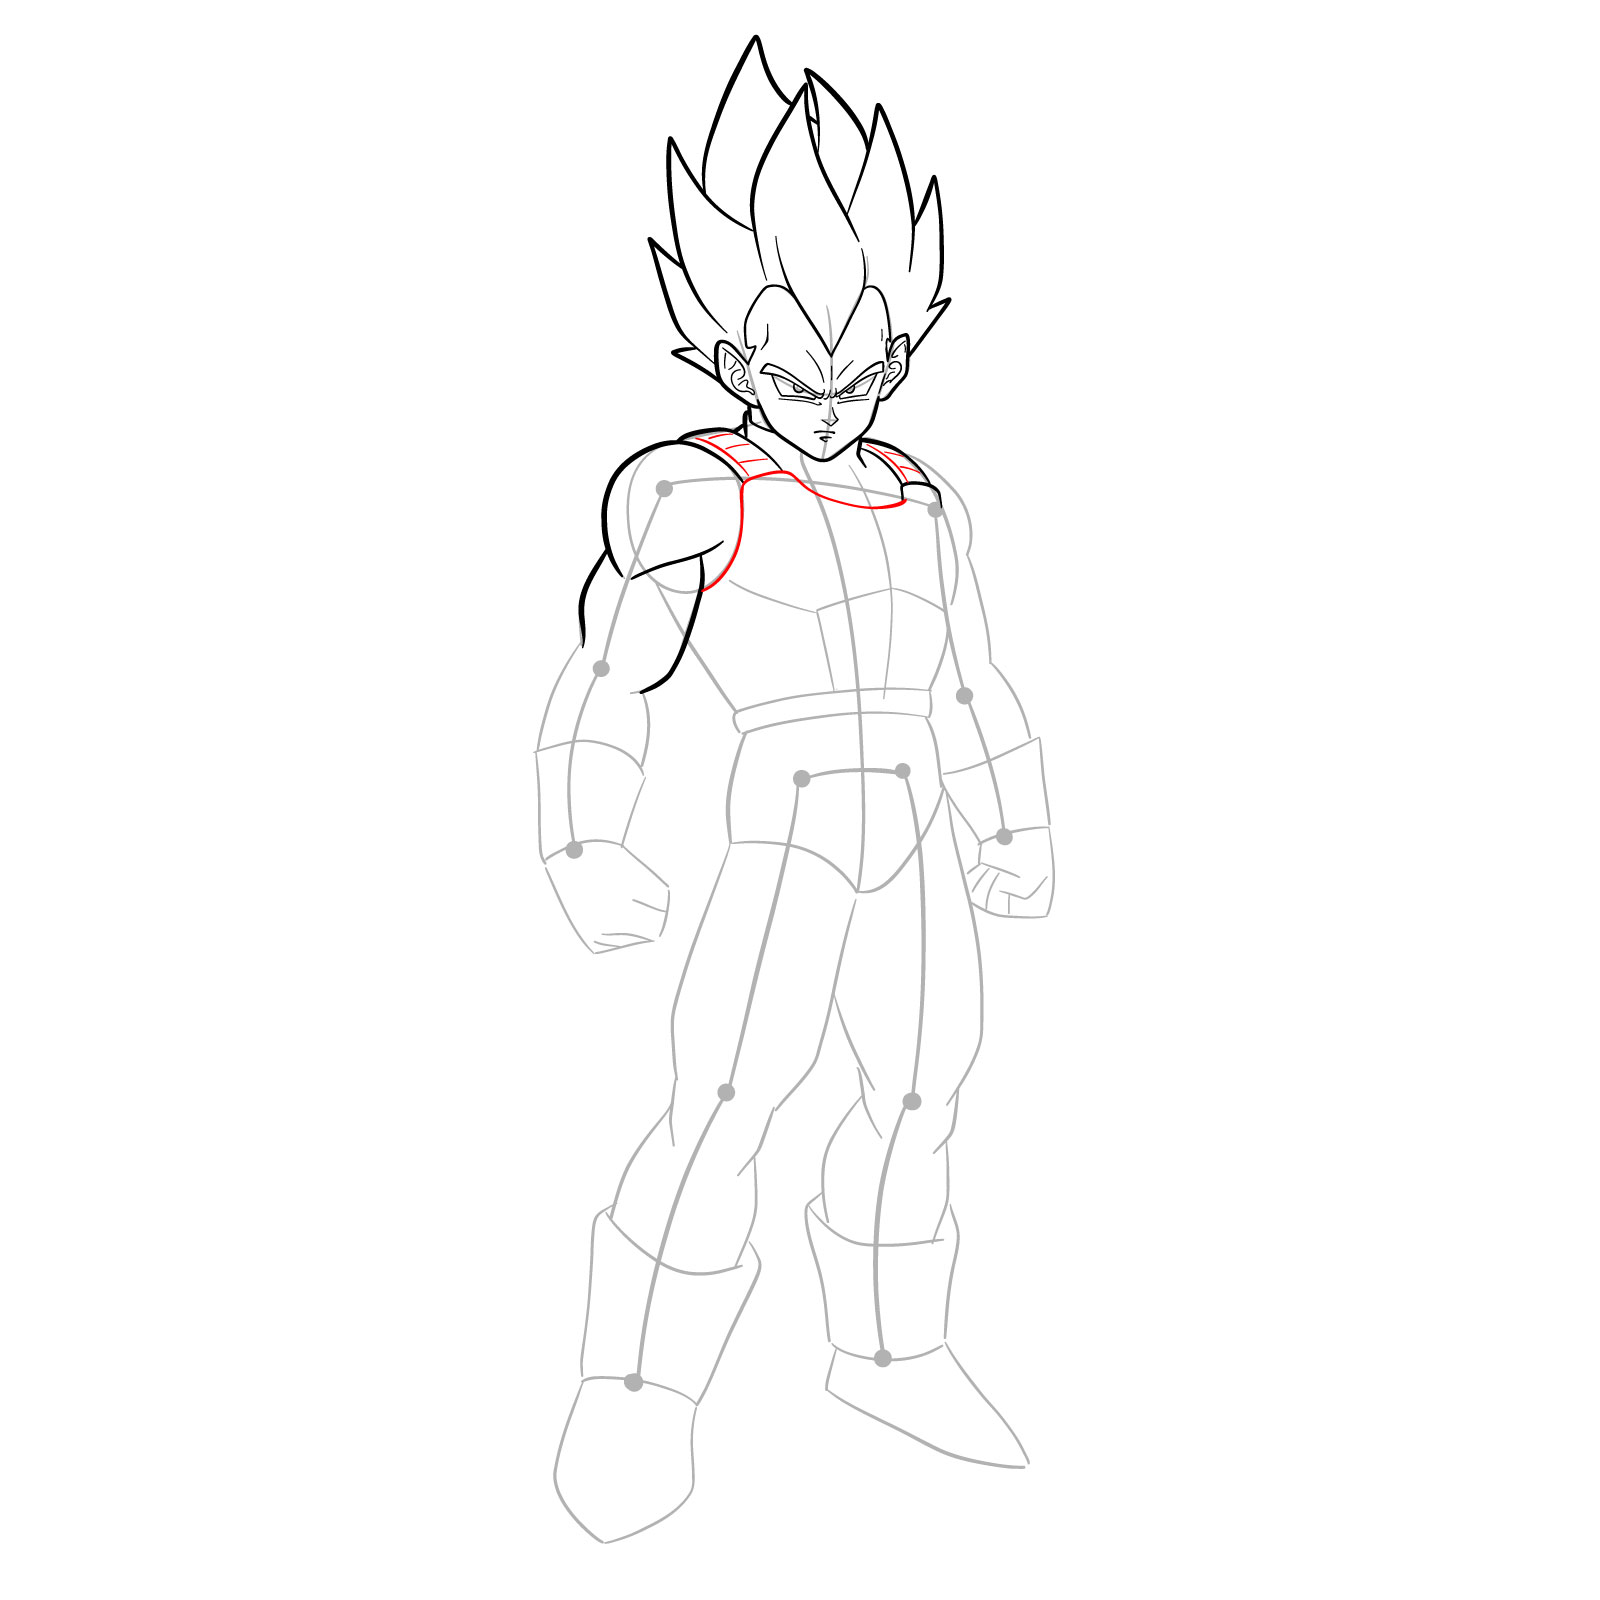 How to draw Vegeta in SSGSS - step 20